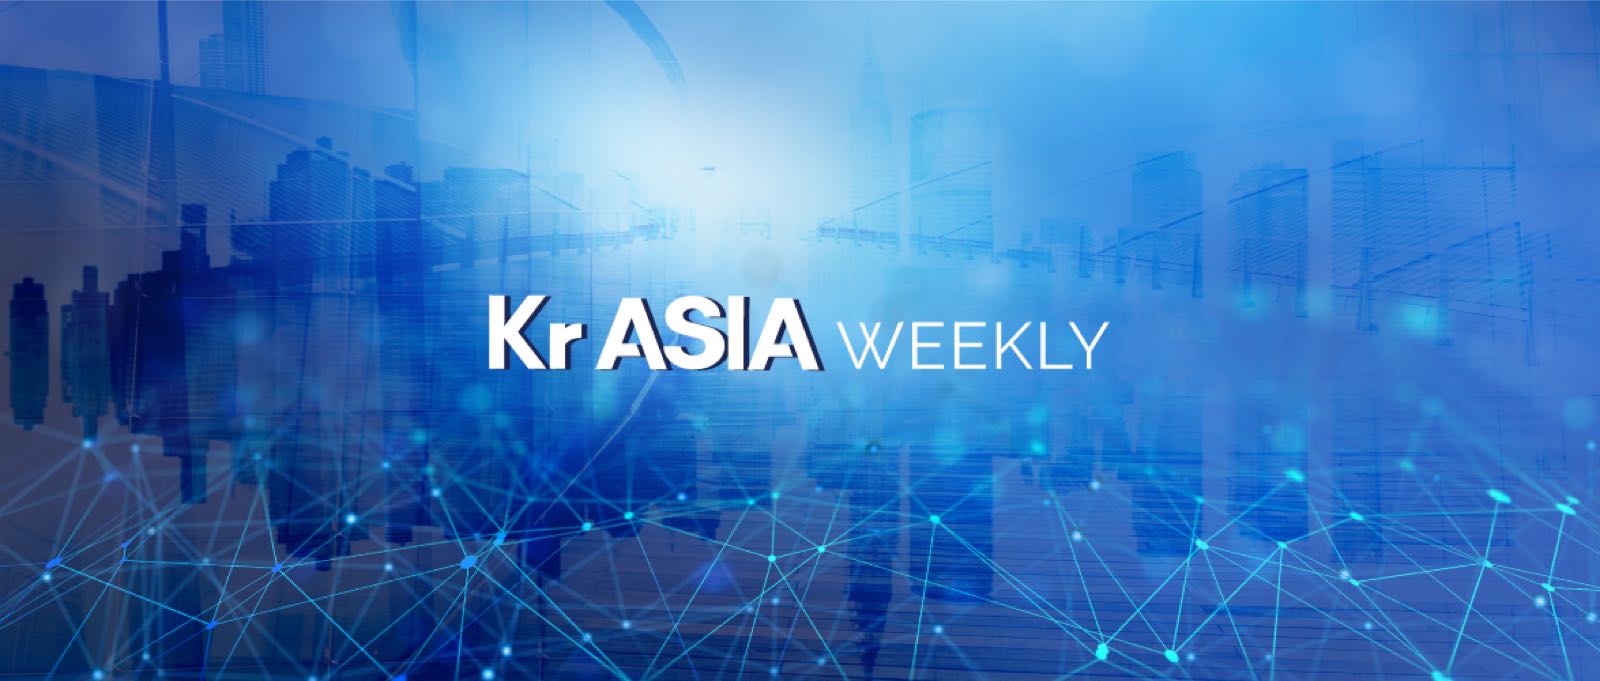 KrASIA weekly: ZTE in state of shock after US ban; DJI ditching traditional fundraising